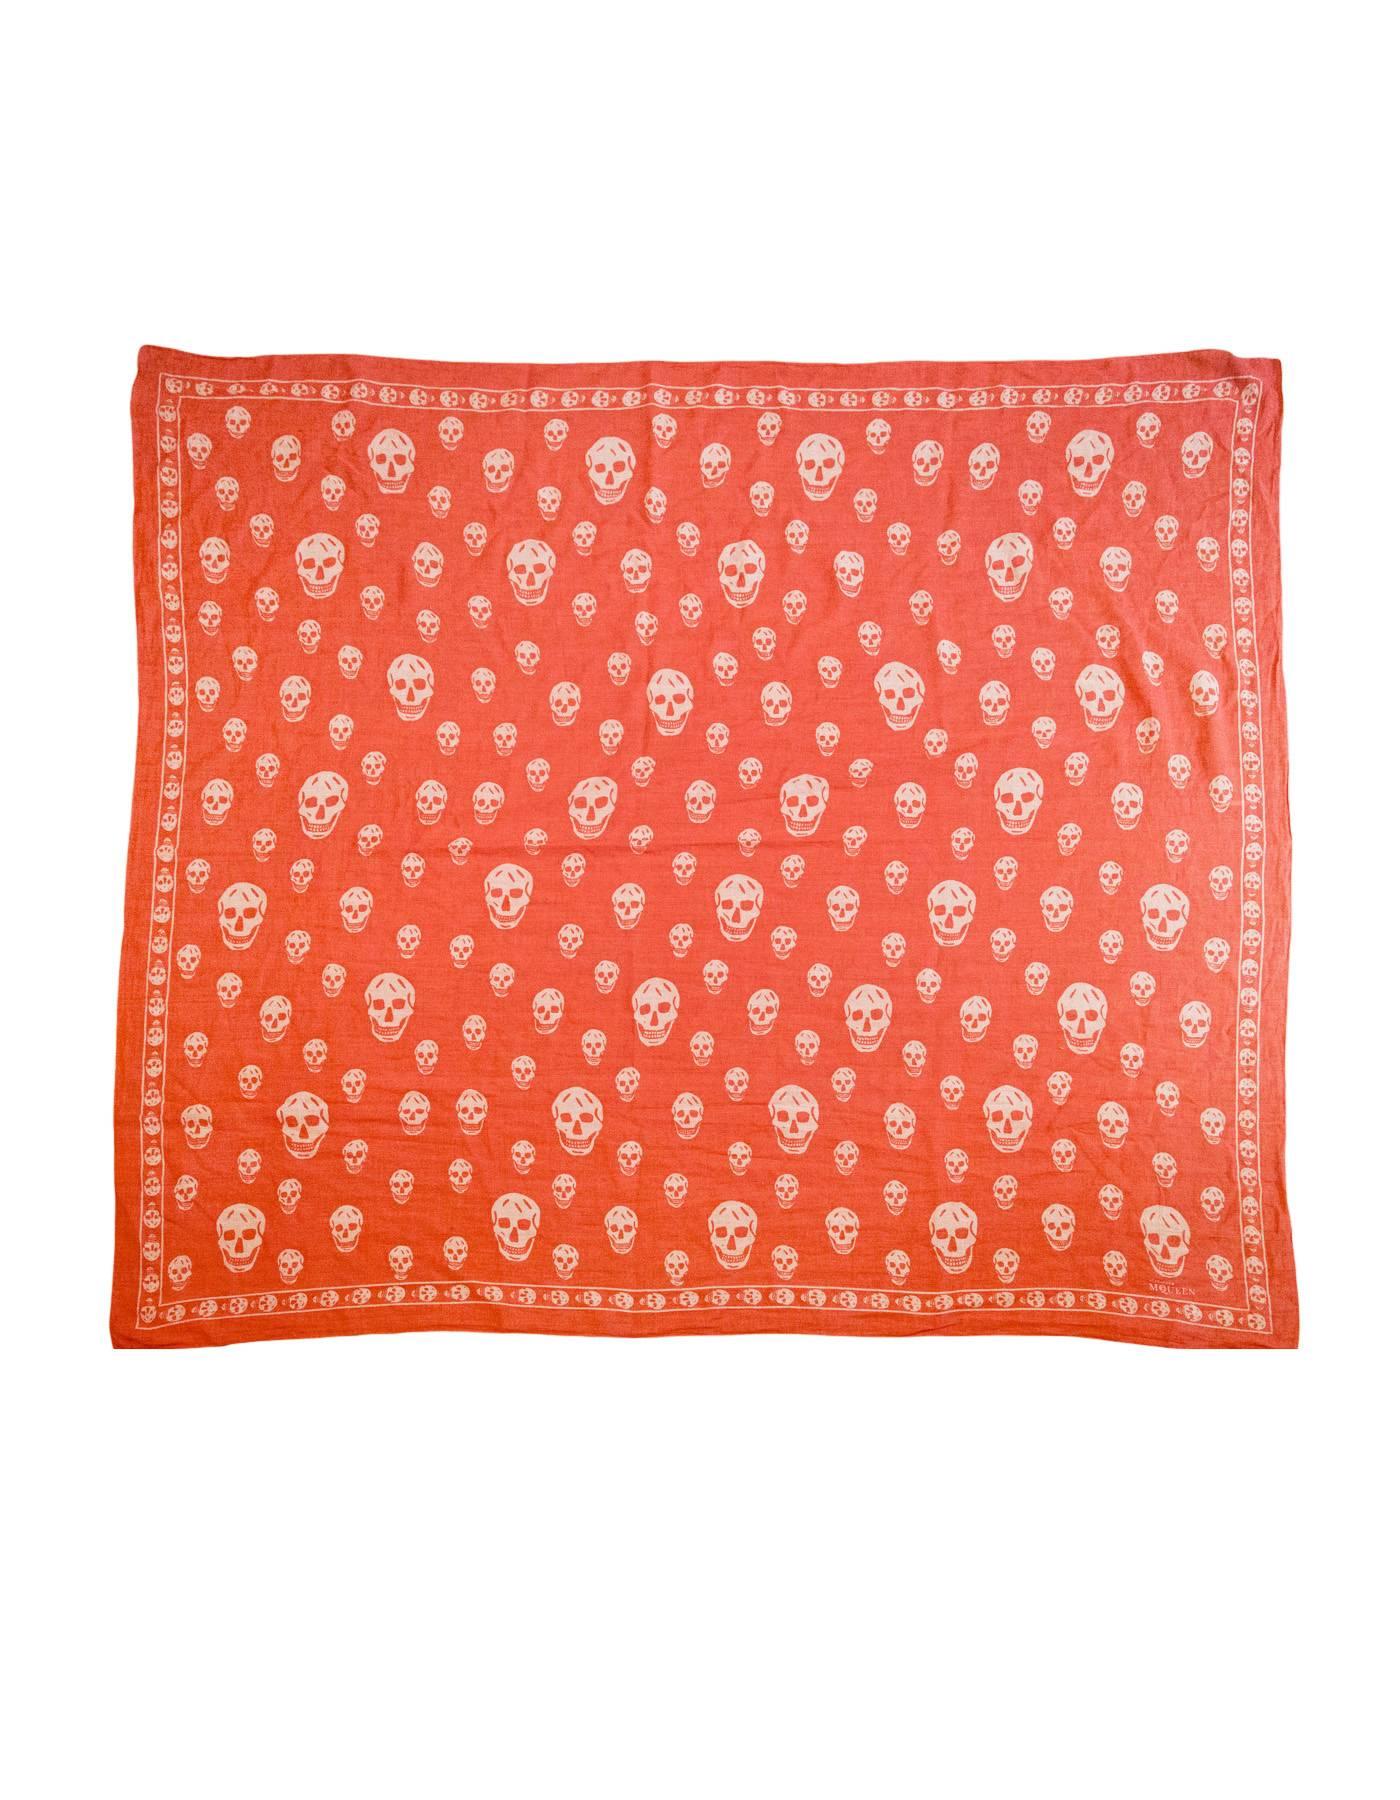 Alexander McQueen Coral and White Classic Skull Scarf

Made In: Italy
Color: Coral and white
Composition: 100% cotton
Overall Condition: Excellent pre-owned condition with the exception of a small stain
Measurements: 
Length: 60"
Width: 60"